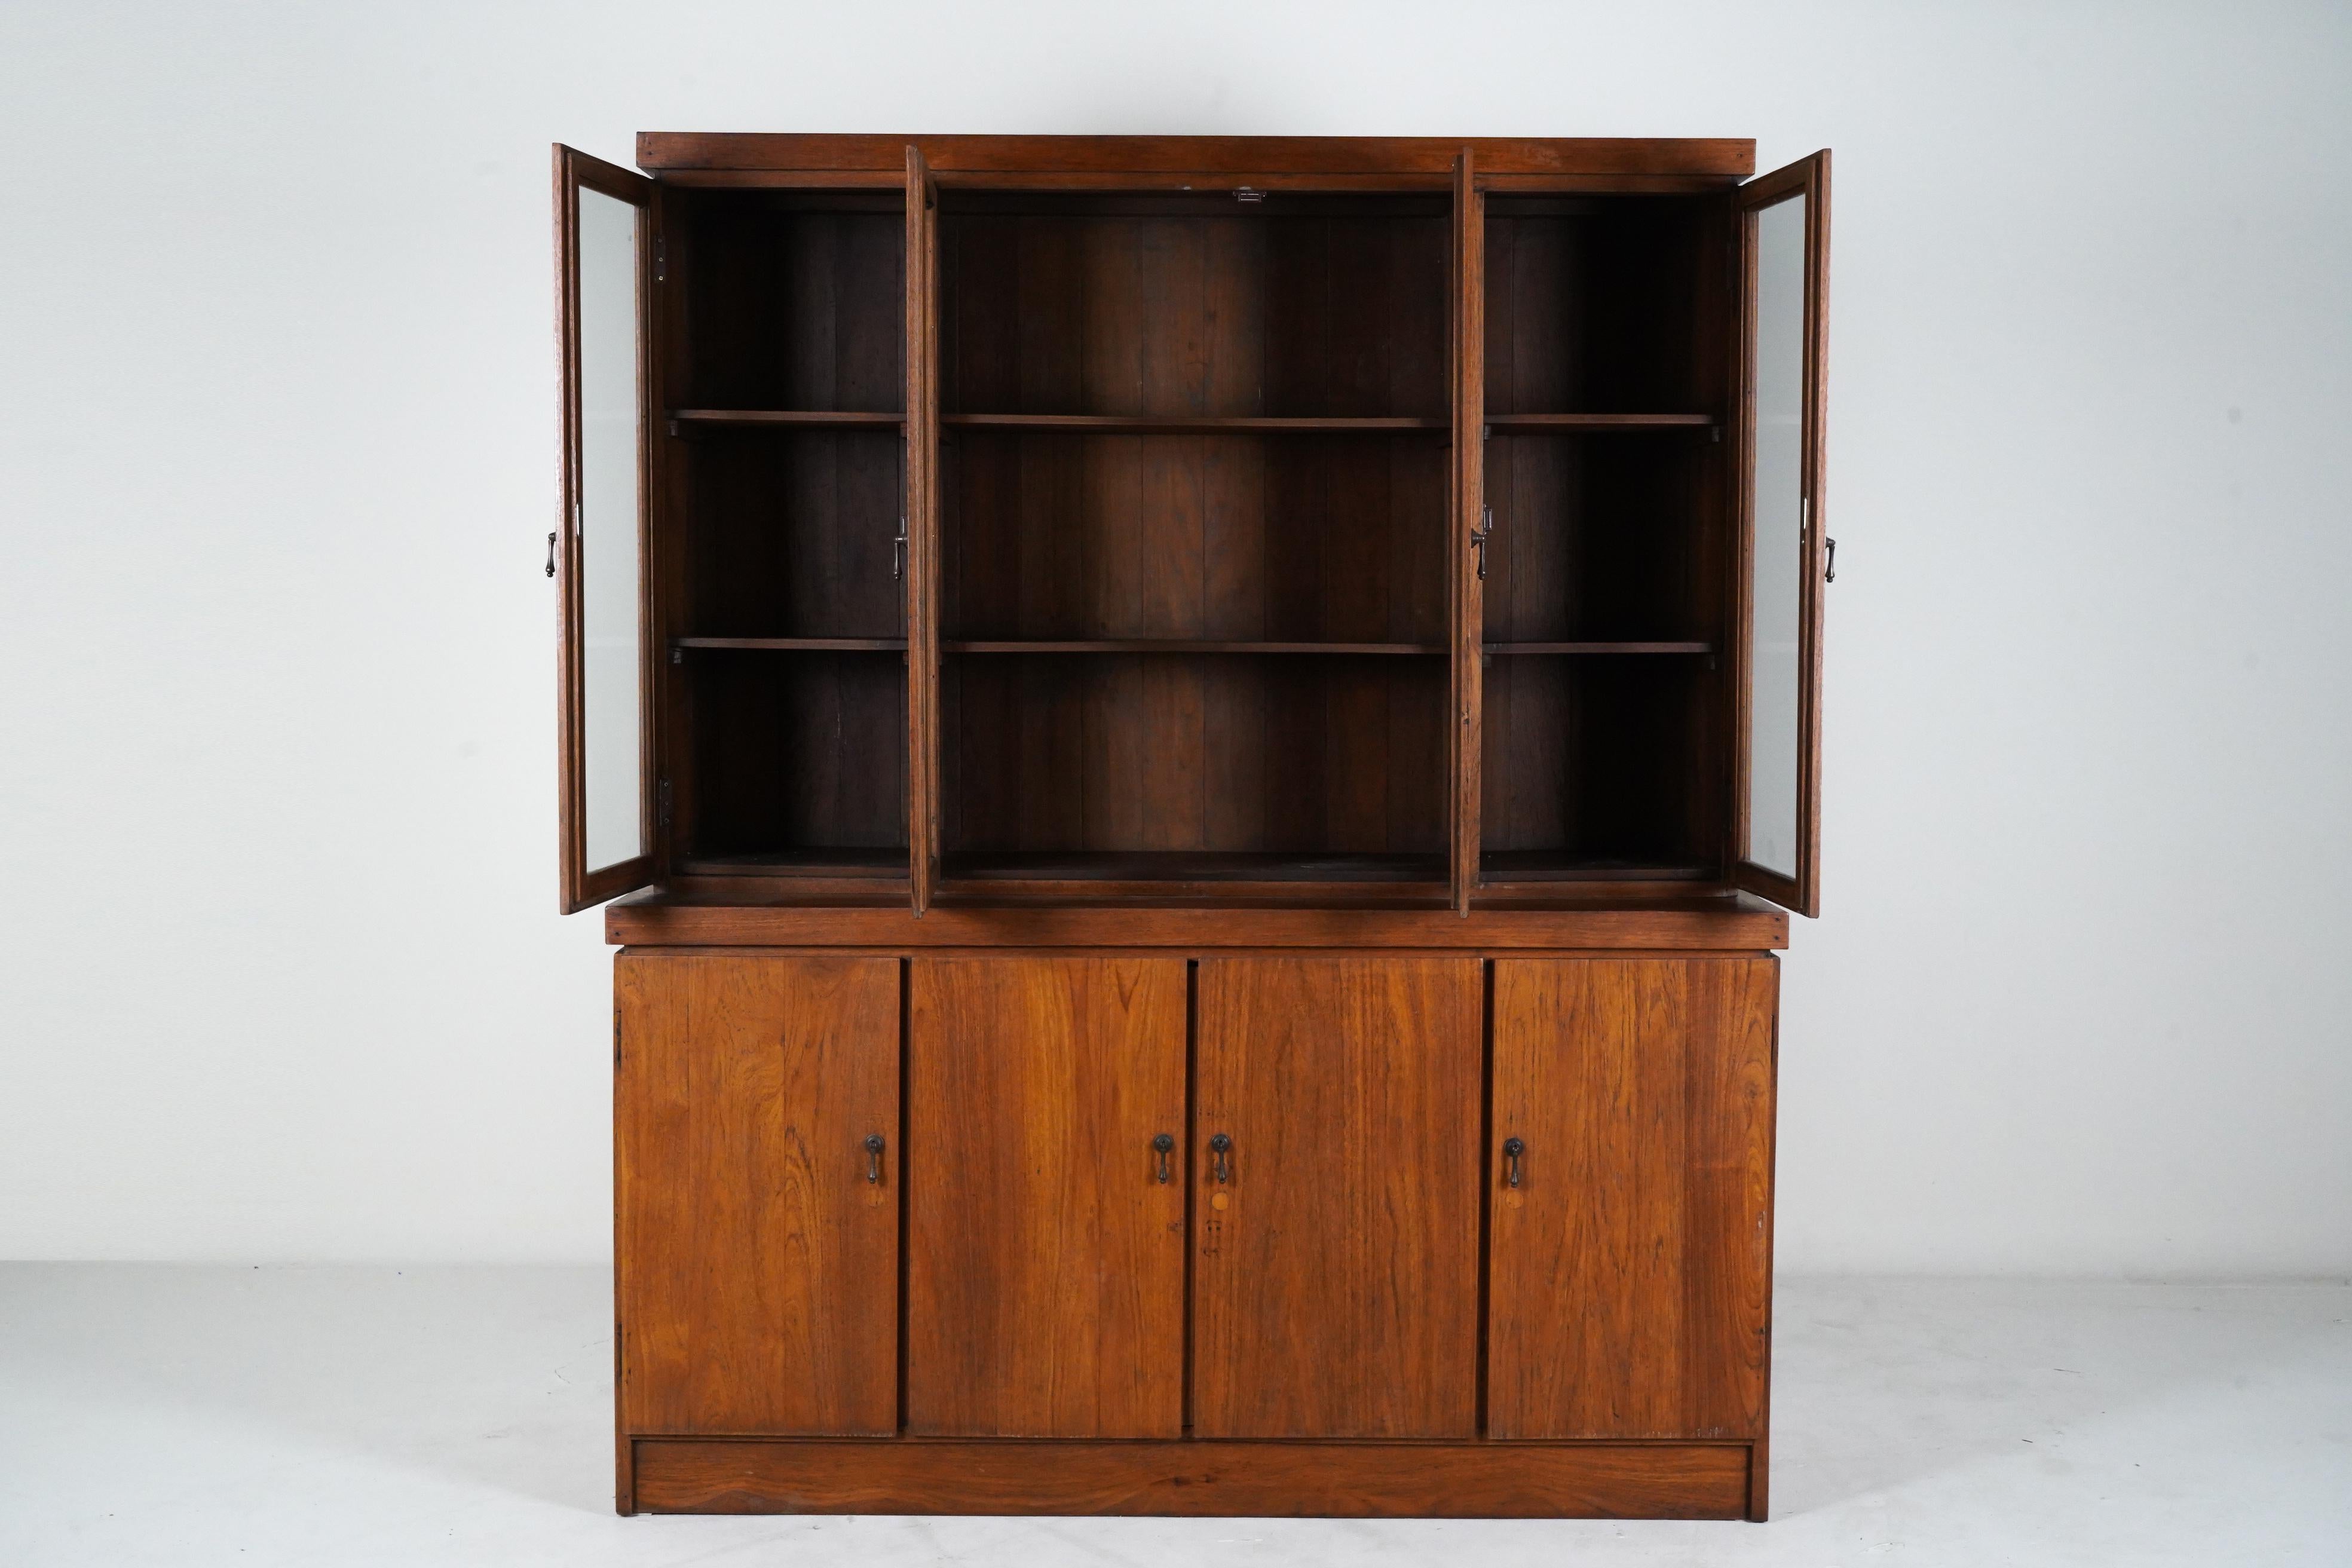 A British Colonial Bookcase with Bottom Storage In Good Condition For Sale In Chicago, IL